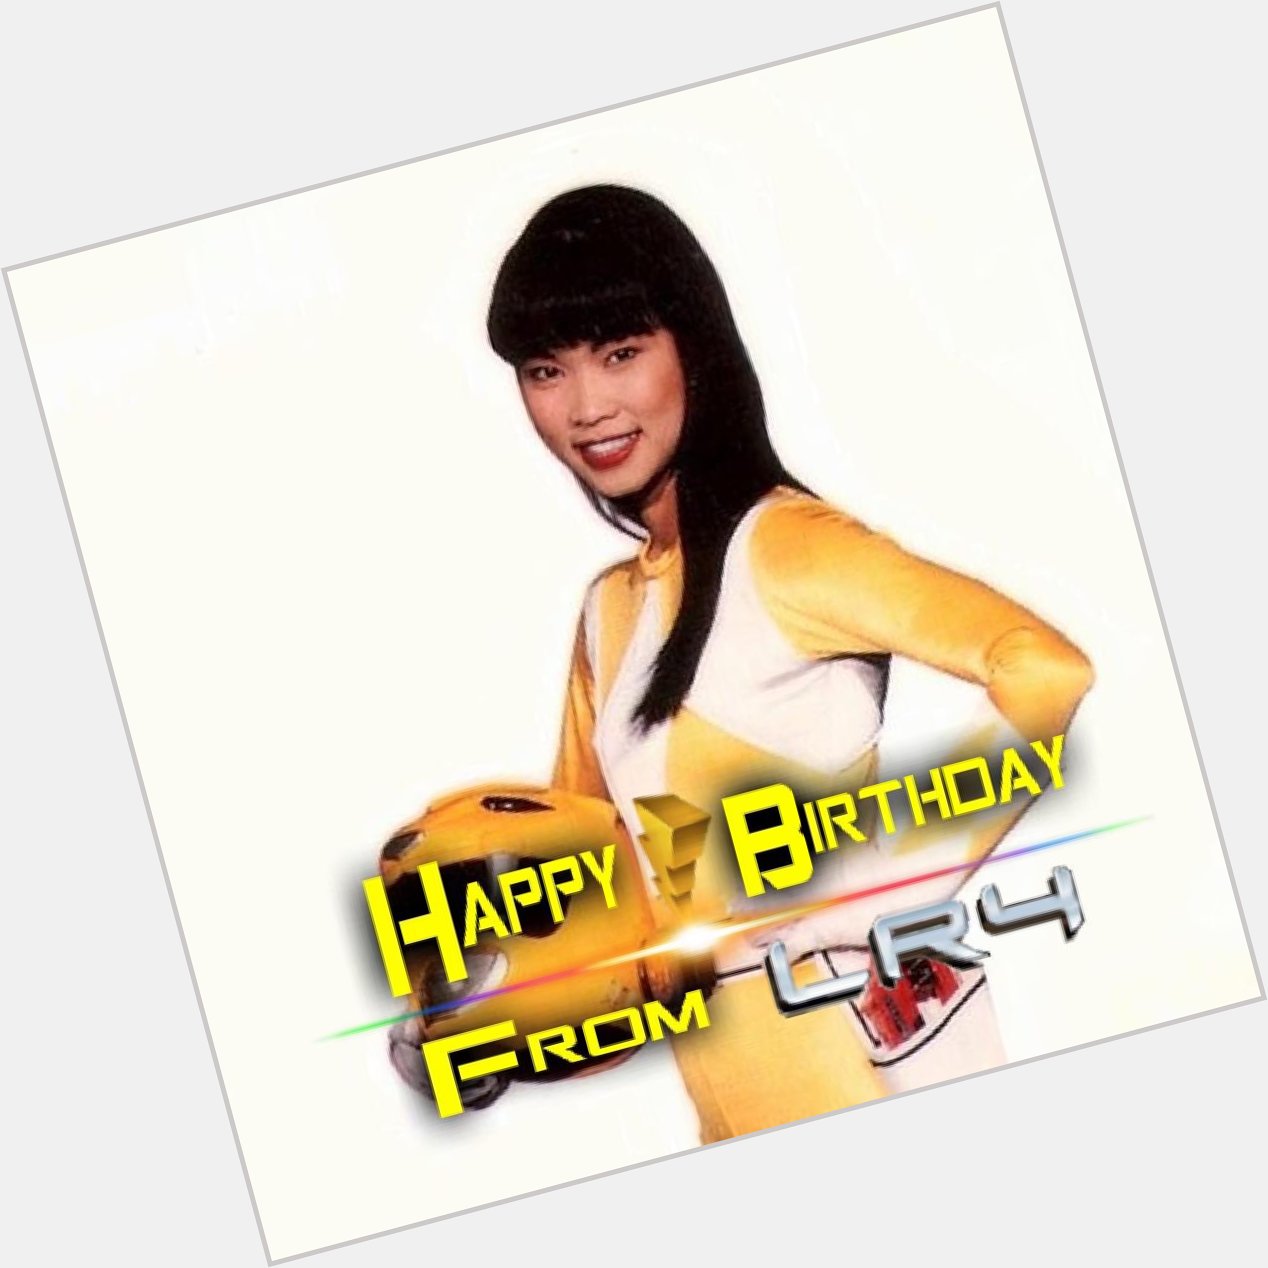 LR4 would like to wish Thuy Trang a Happy Birthday and May The Power Protect Her Always! 